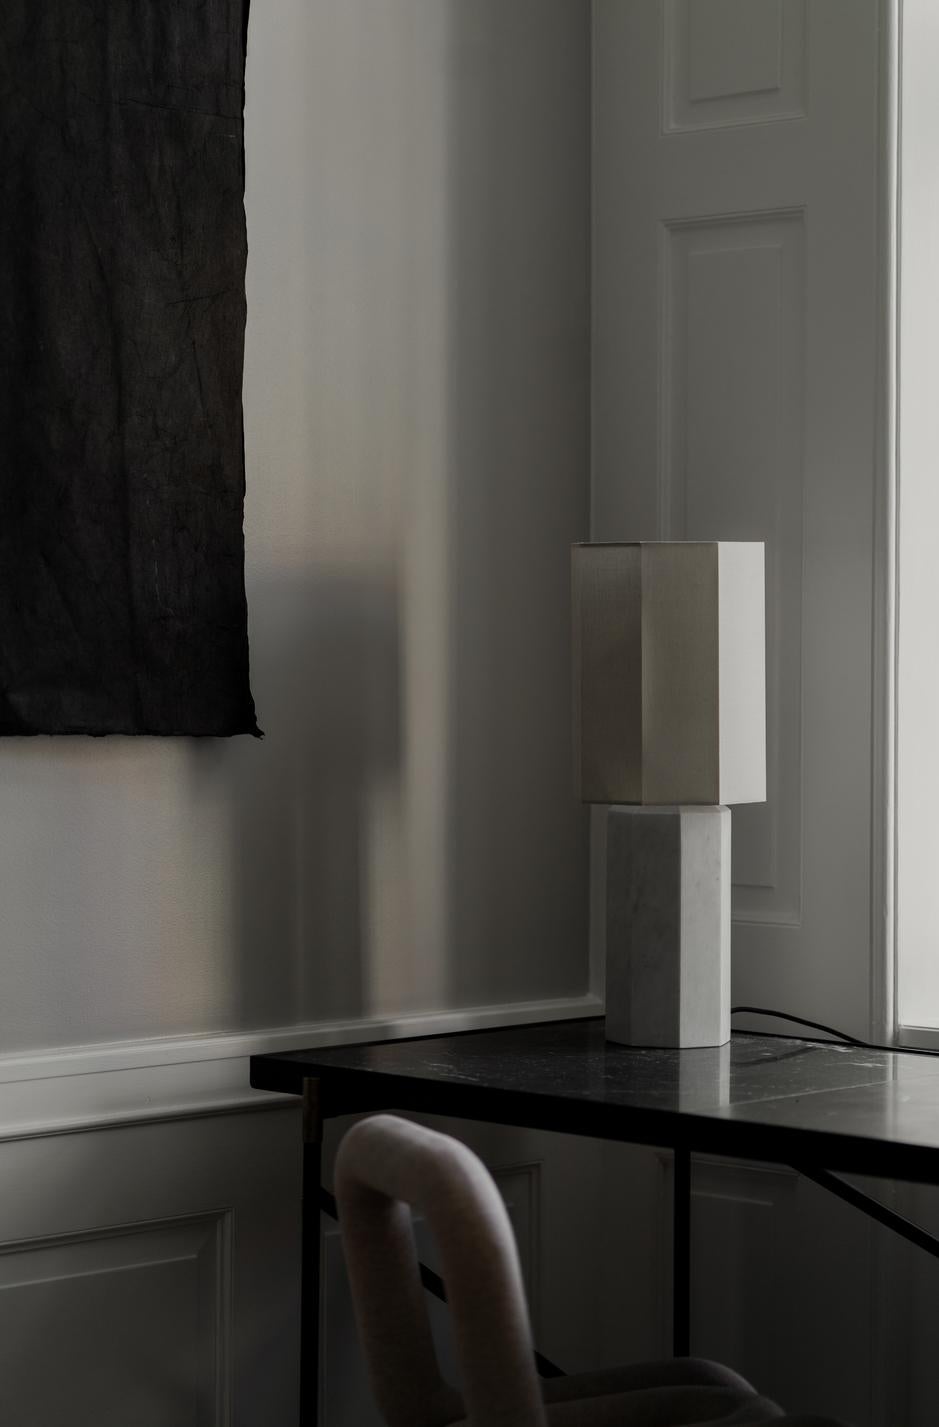 Table Lamp 'The Eight over Eight' by Louise Roe 

Designed in Denmark and manufactured in Italy.

Model shown in the picture: 
Base: White marble
Lampshade: Ocher 

Dimensions : 
Height: 60 cm
Diameter: 21.5 cm

Louise Roe is a